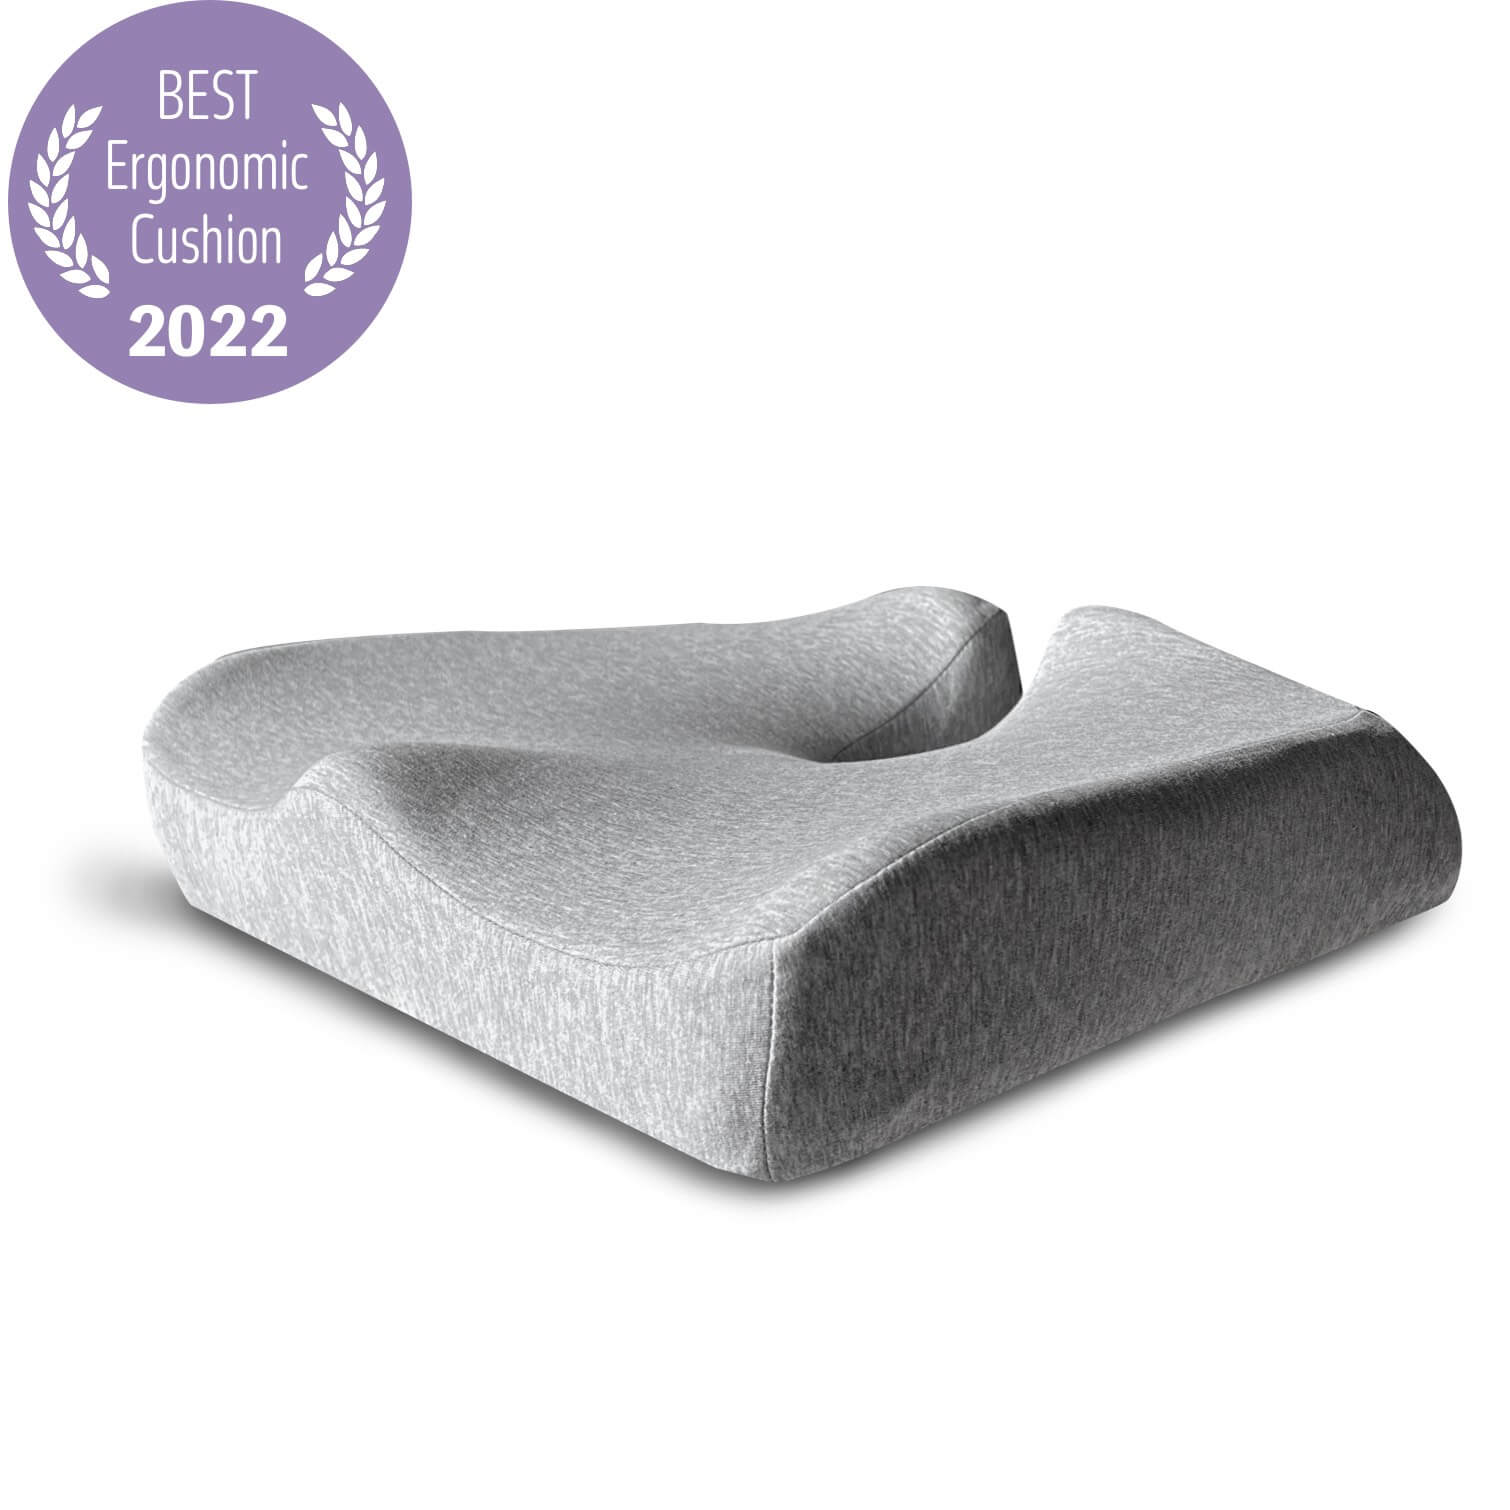 6 Best Seat Cushions for Posture 2022